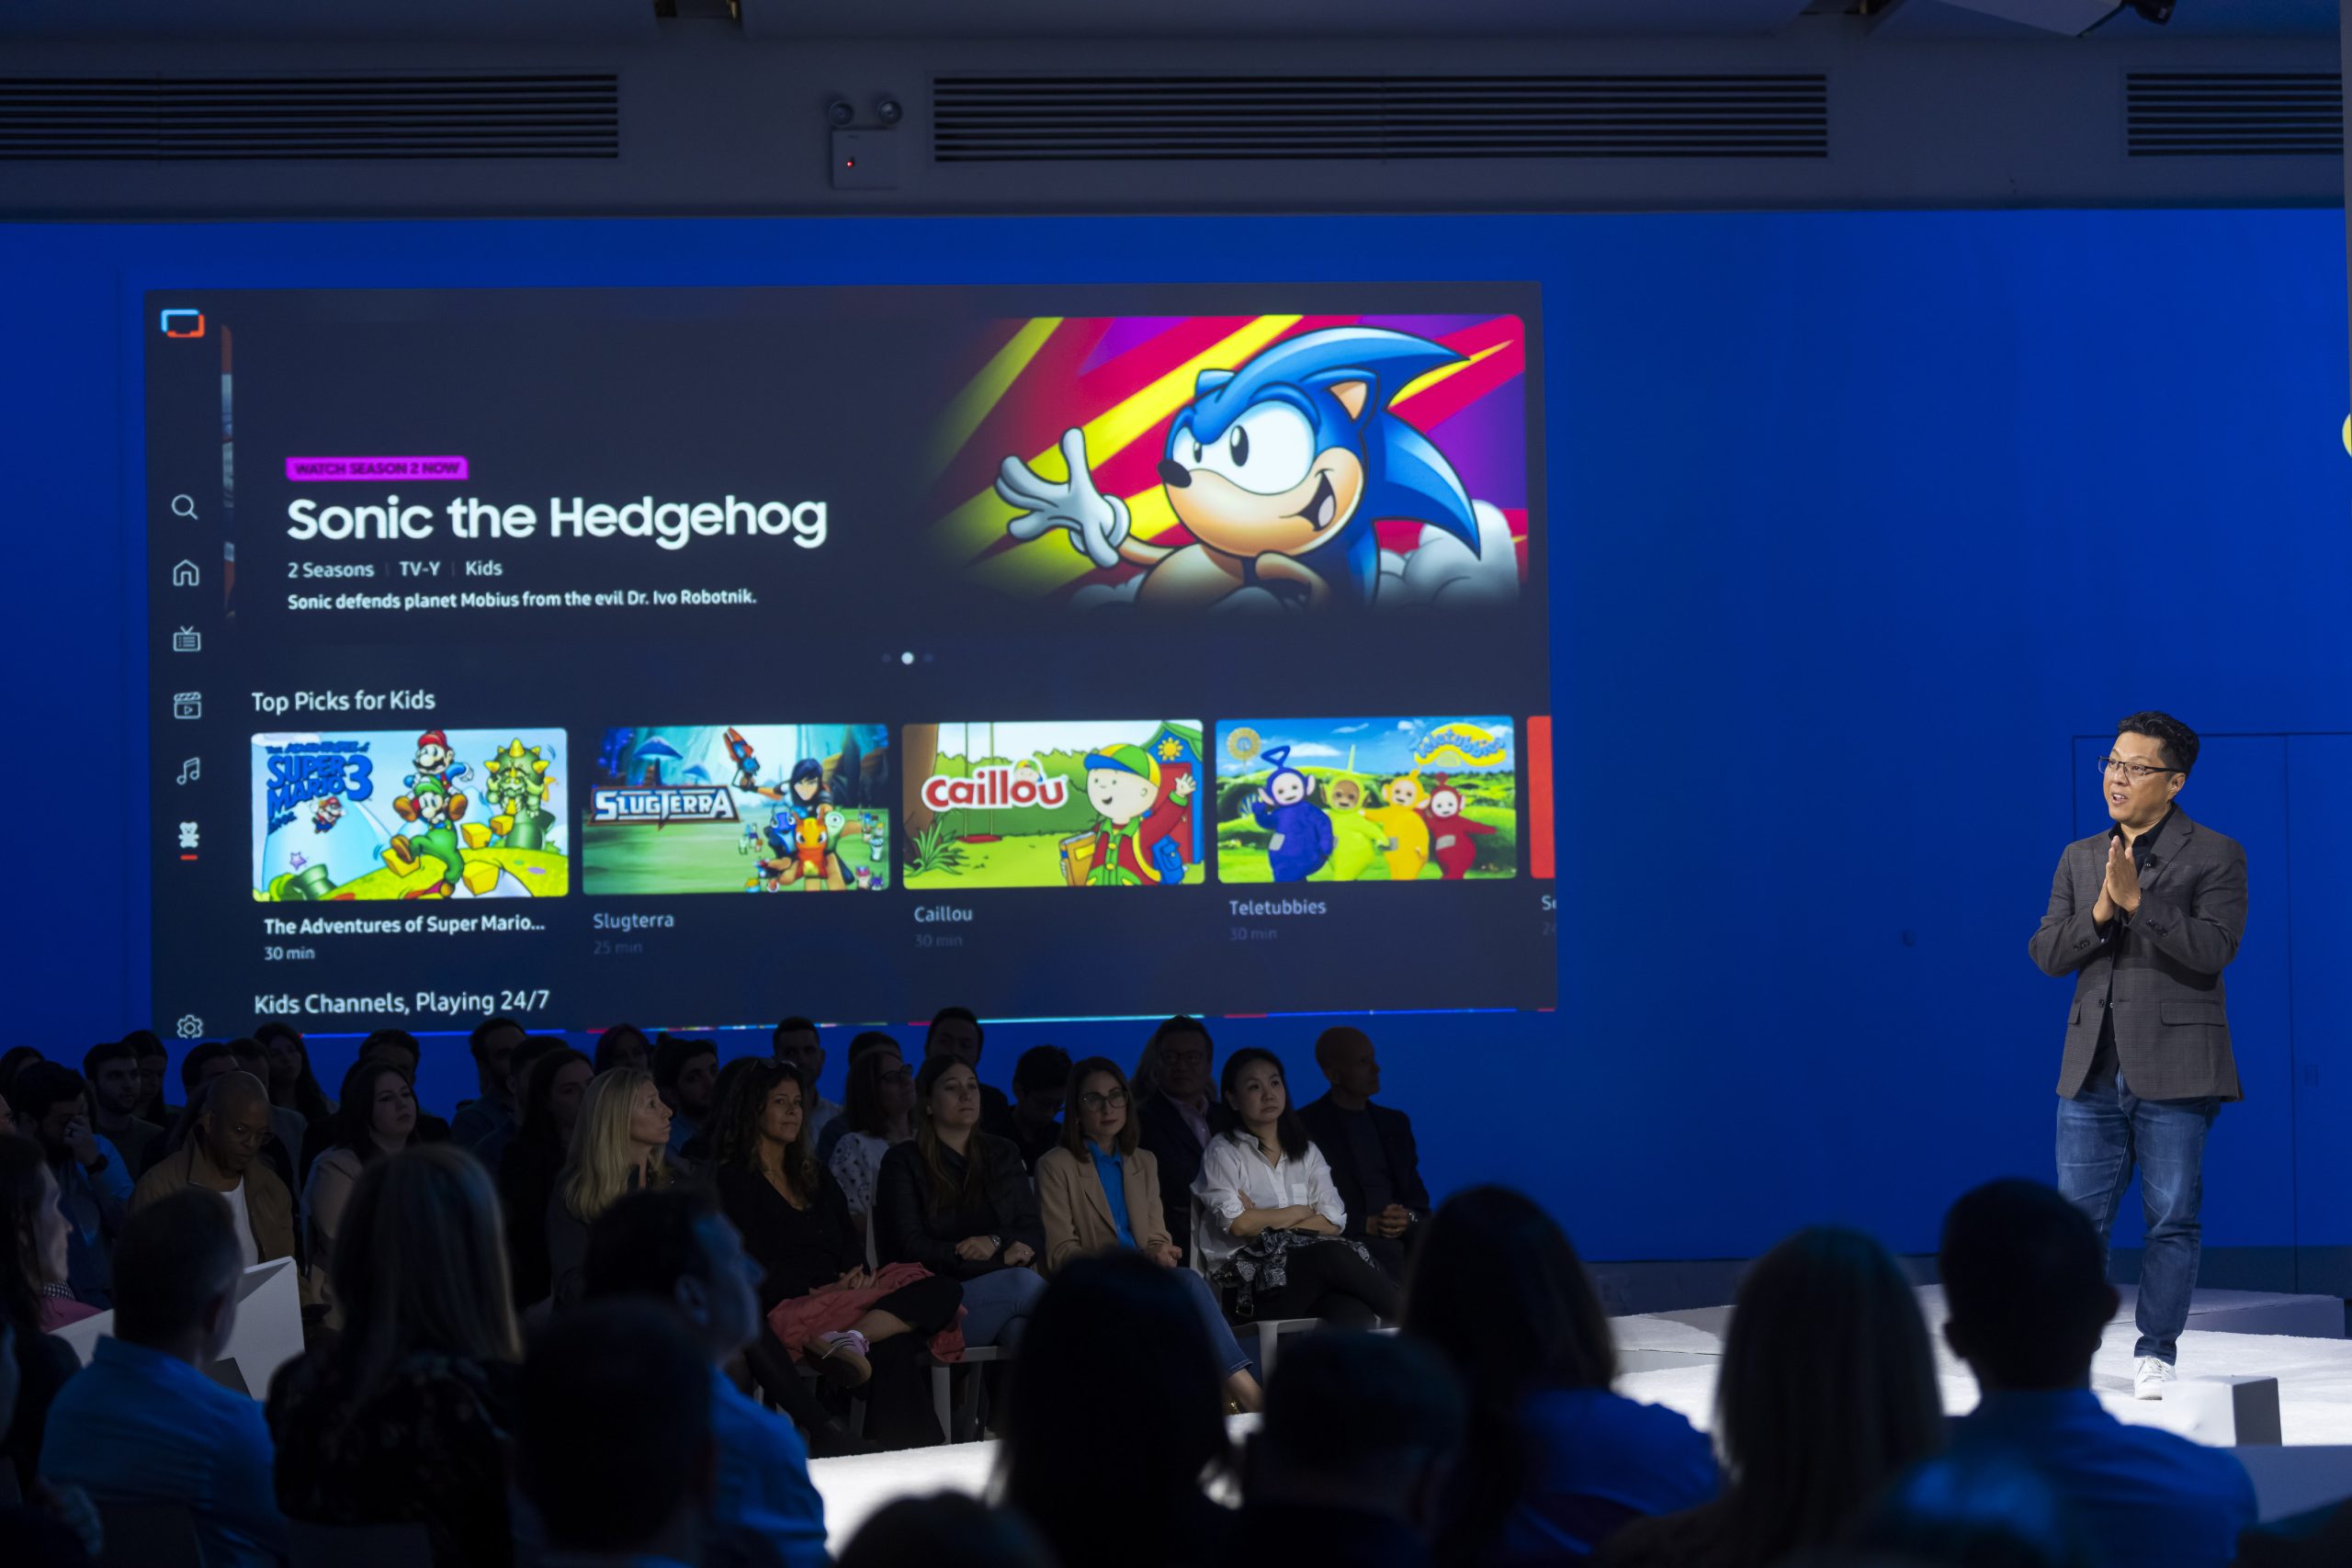 Speaker on stage with display of Samsung Gaming Hub showing Sonic the Hedgehog